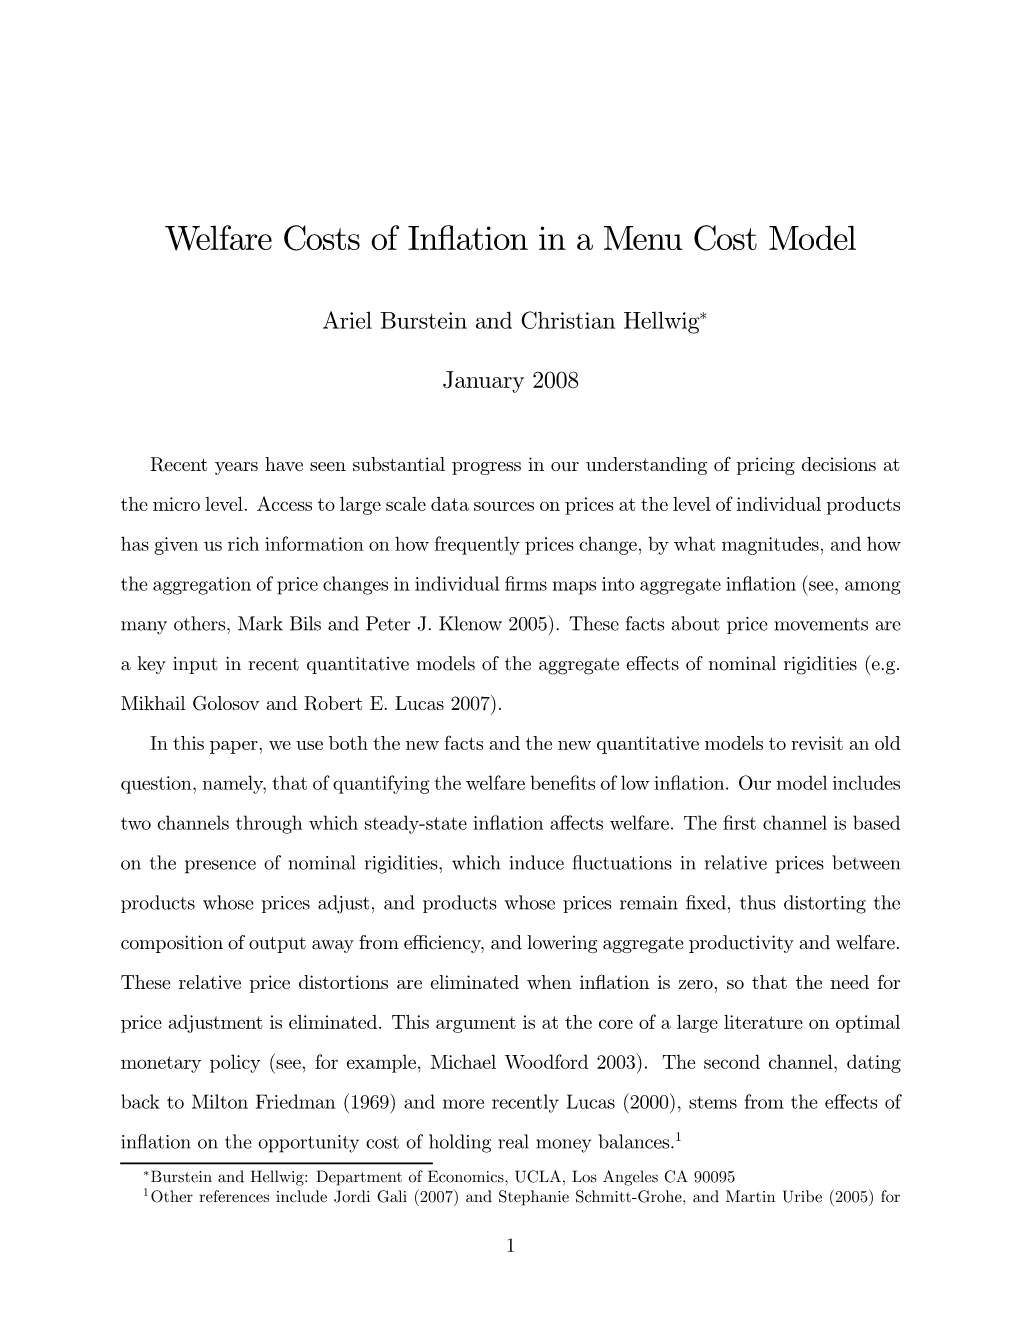 Welfare Costs of Inflation in a Menu Cost Model